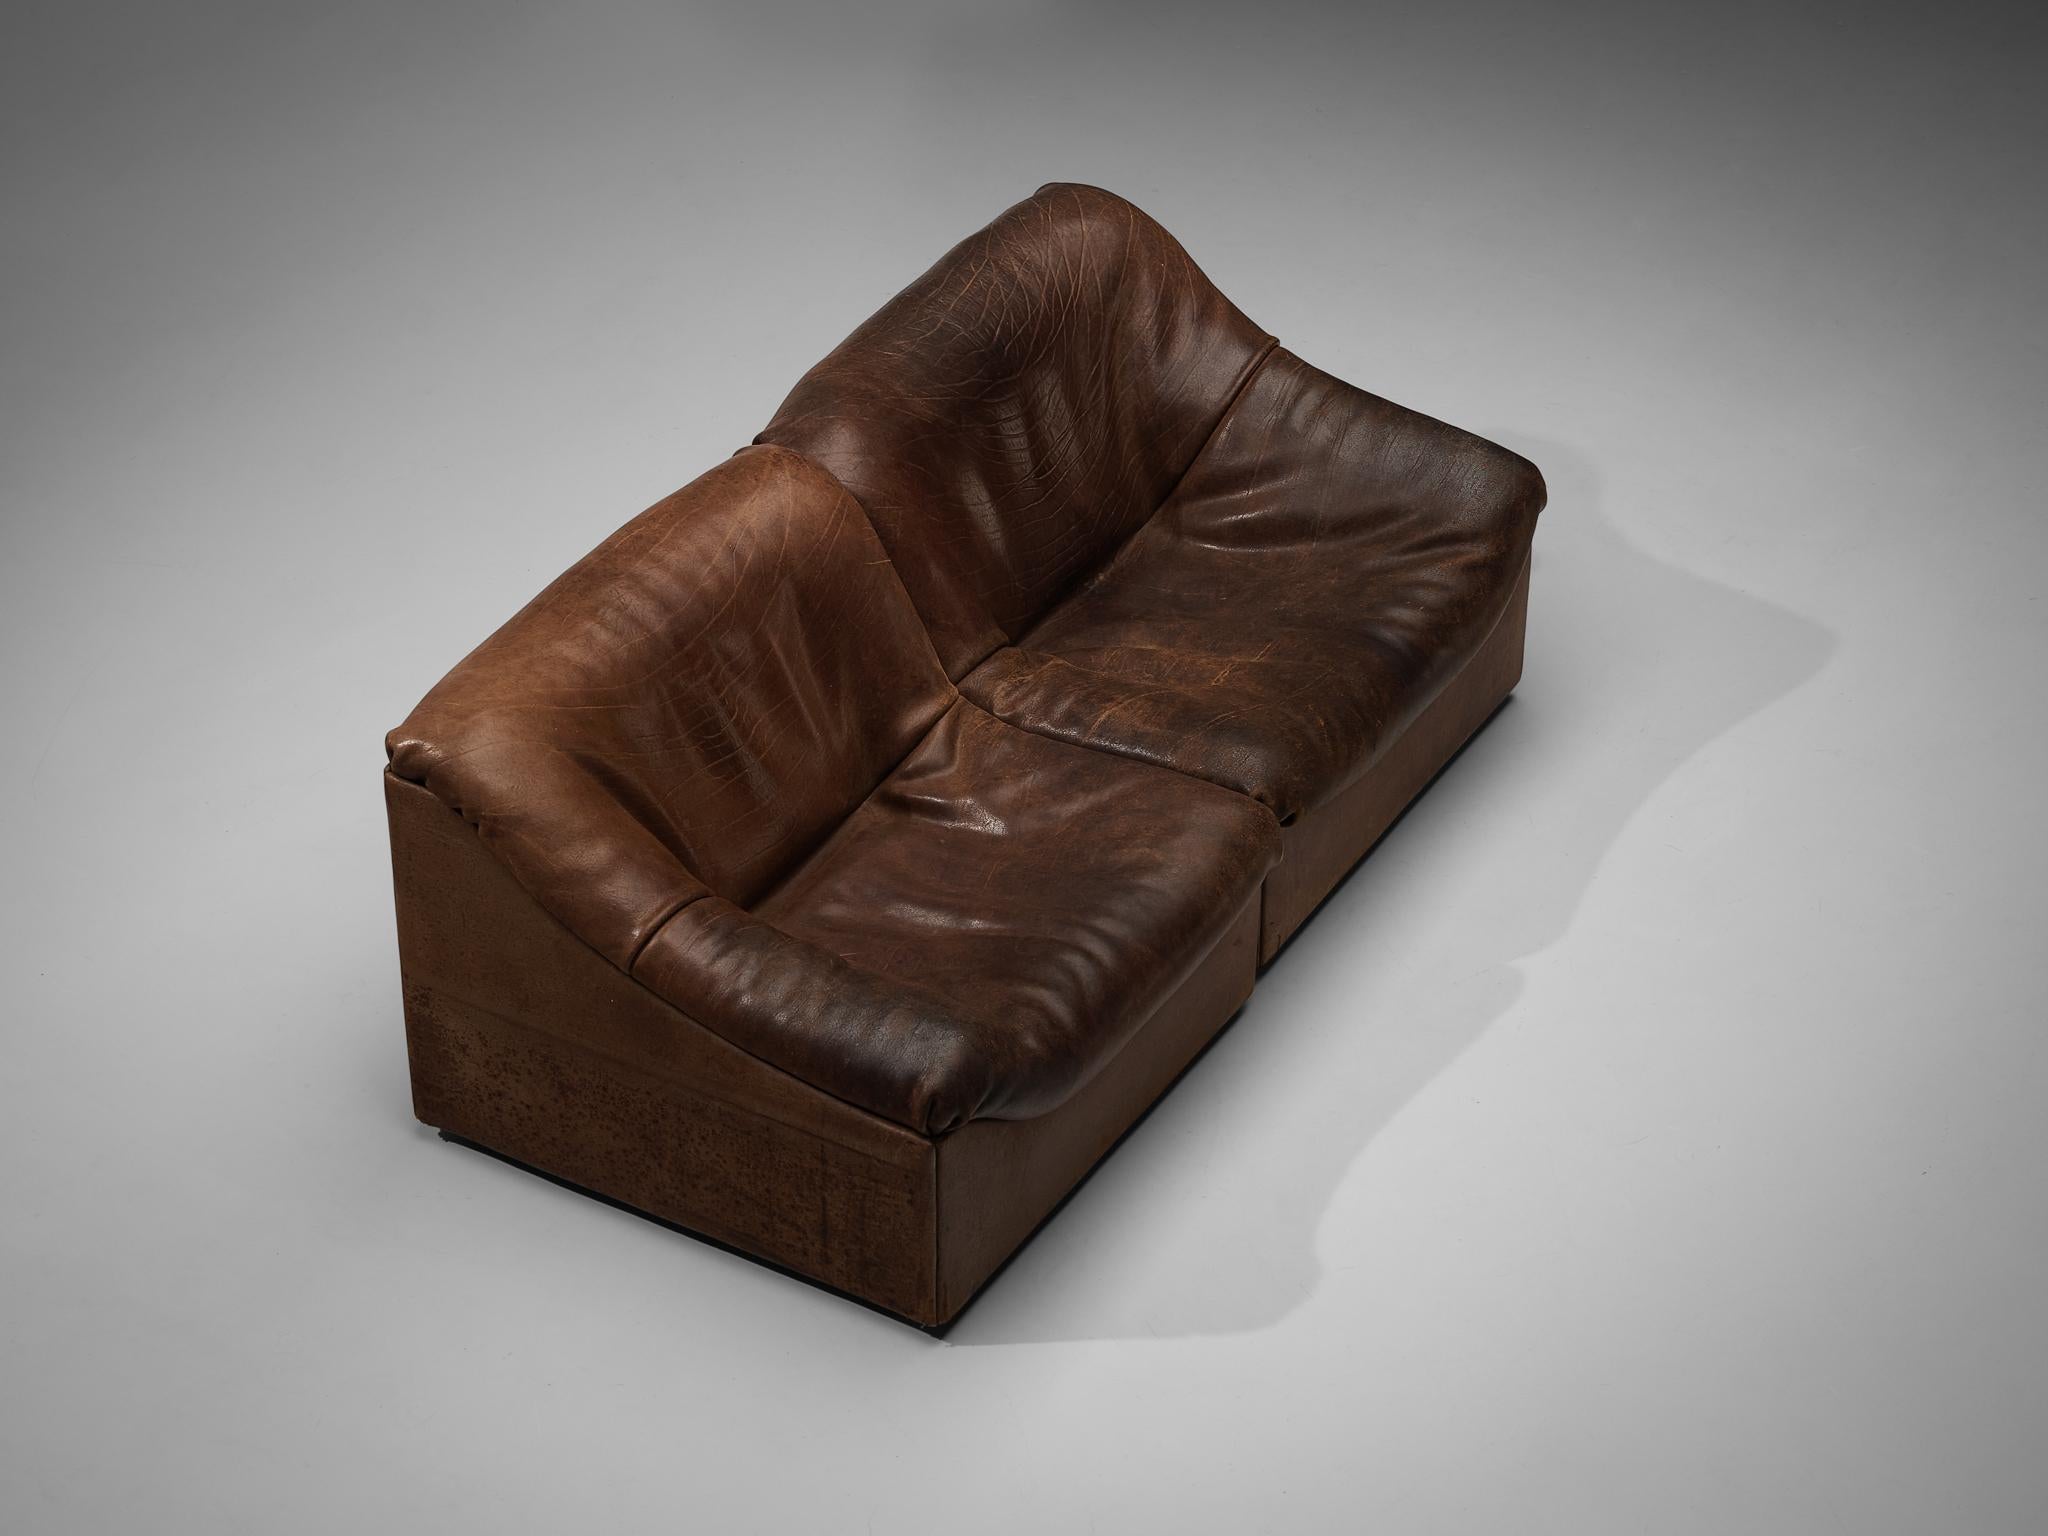 De Sede, sectional sofa or lounge chairs model 'DS-46', brown leather, Switzerland, 1970s

Comfortable sectional sofa or lounge chairs in thick buffalo leather by De Sede. This model features a solid base with a rounded, bulky seat and a high back.